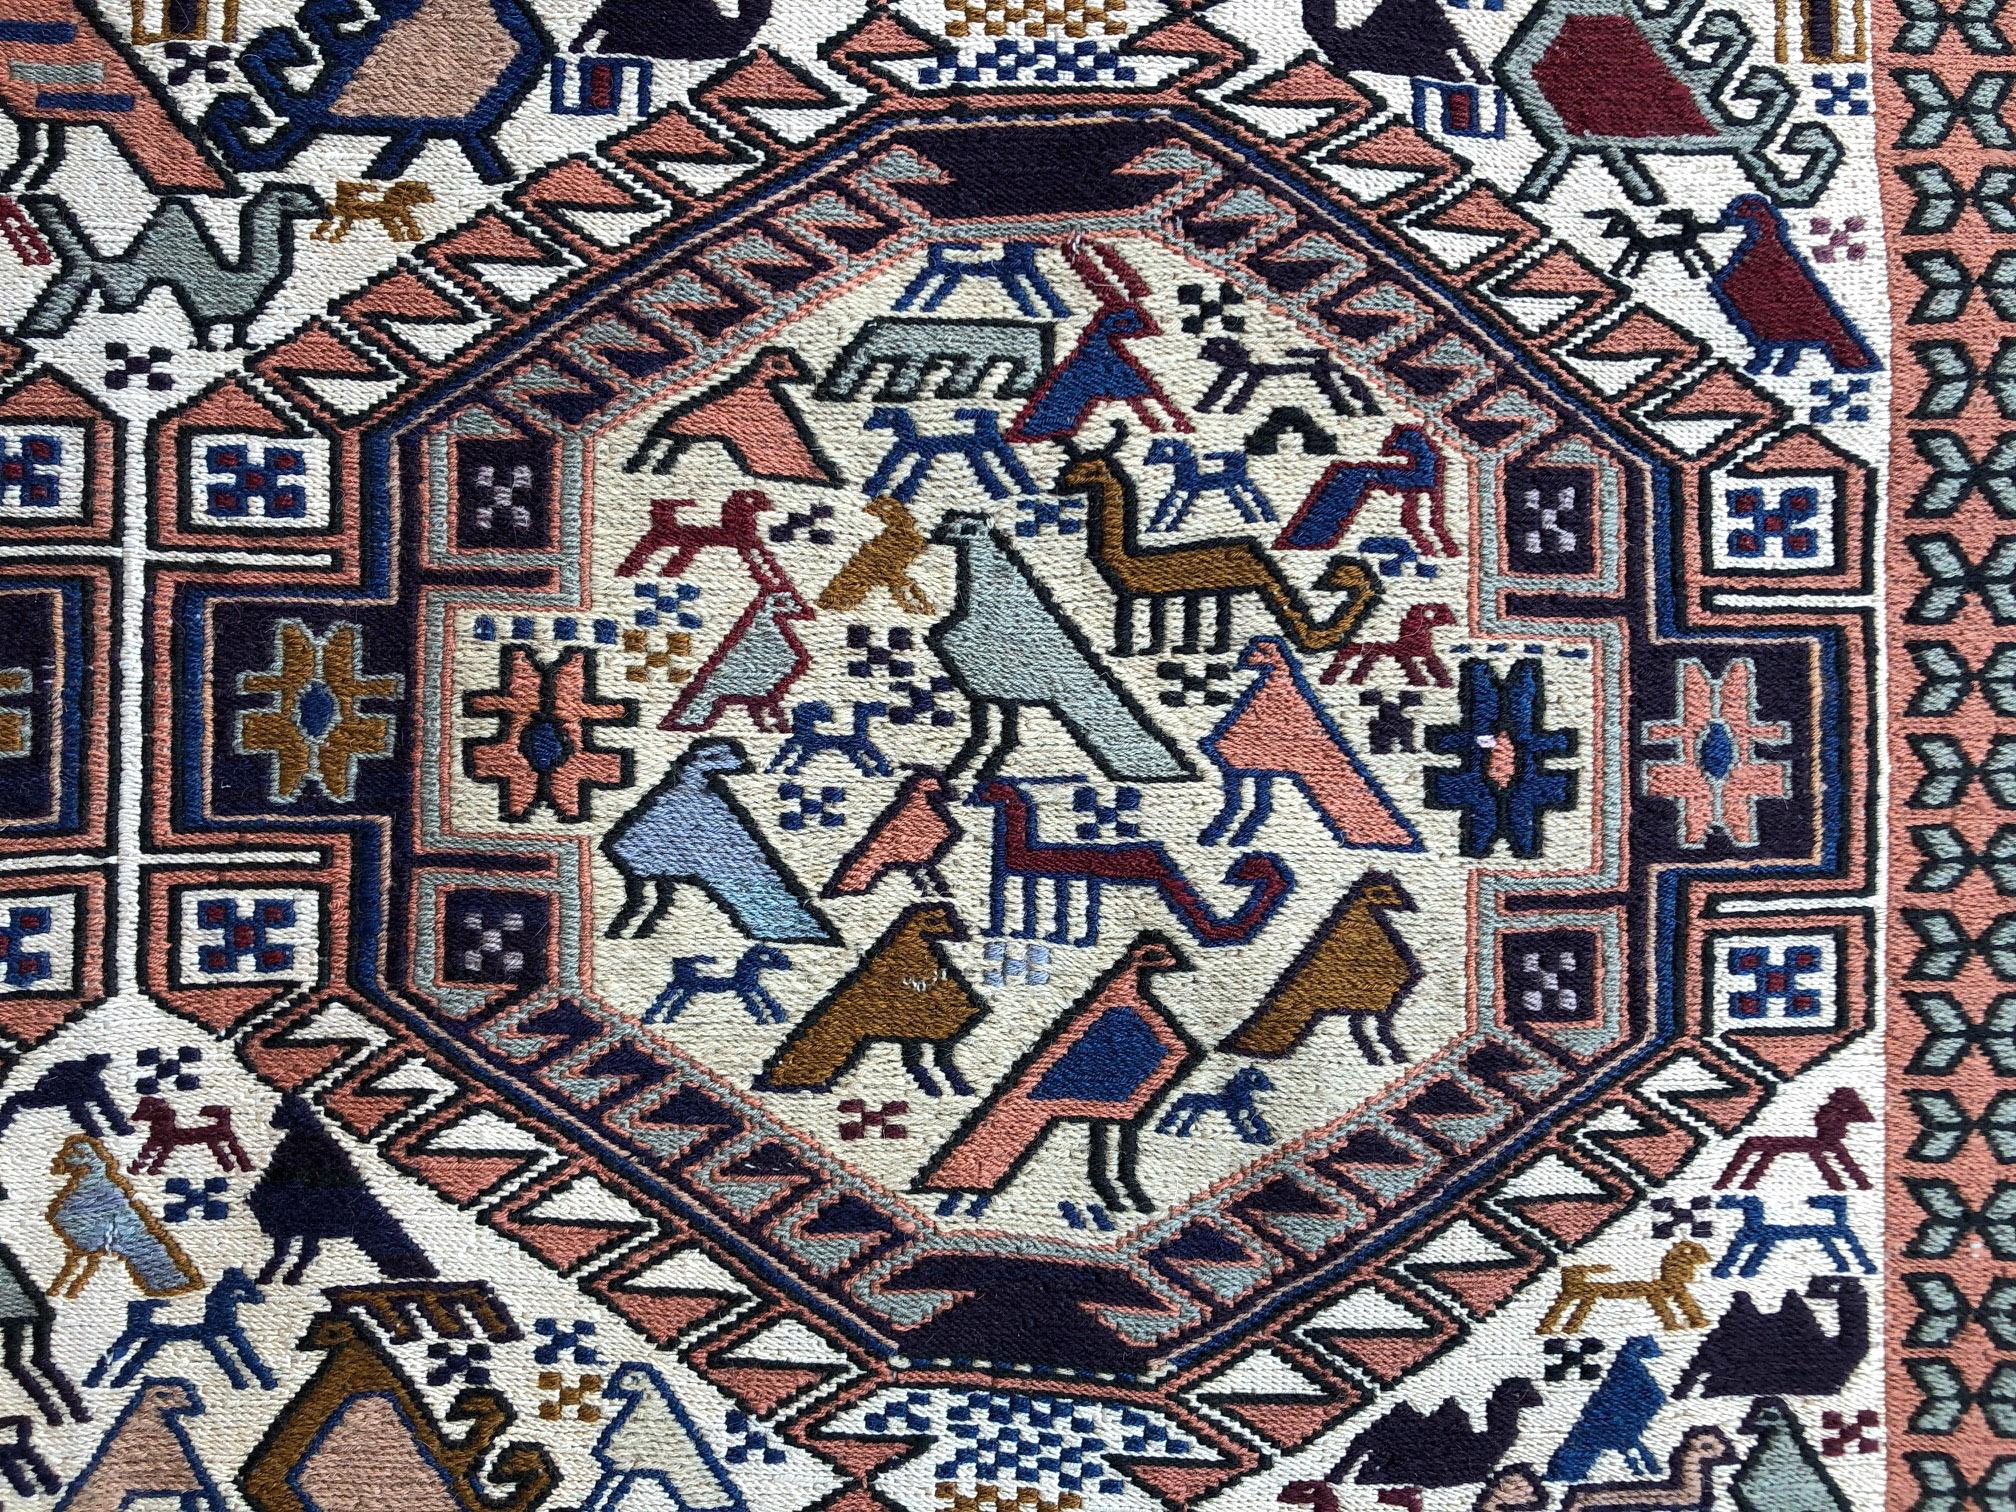 Persian Sumak Multi-Color Tribal Animal Motif Kilim Rug In New Condition For Sale In San Diego, CA